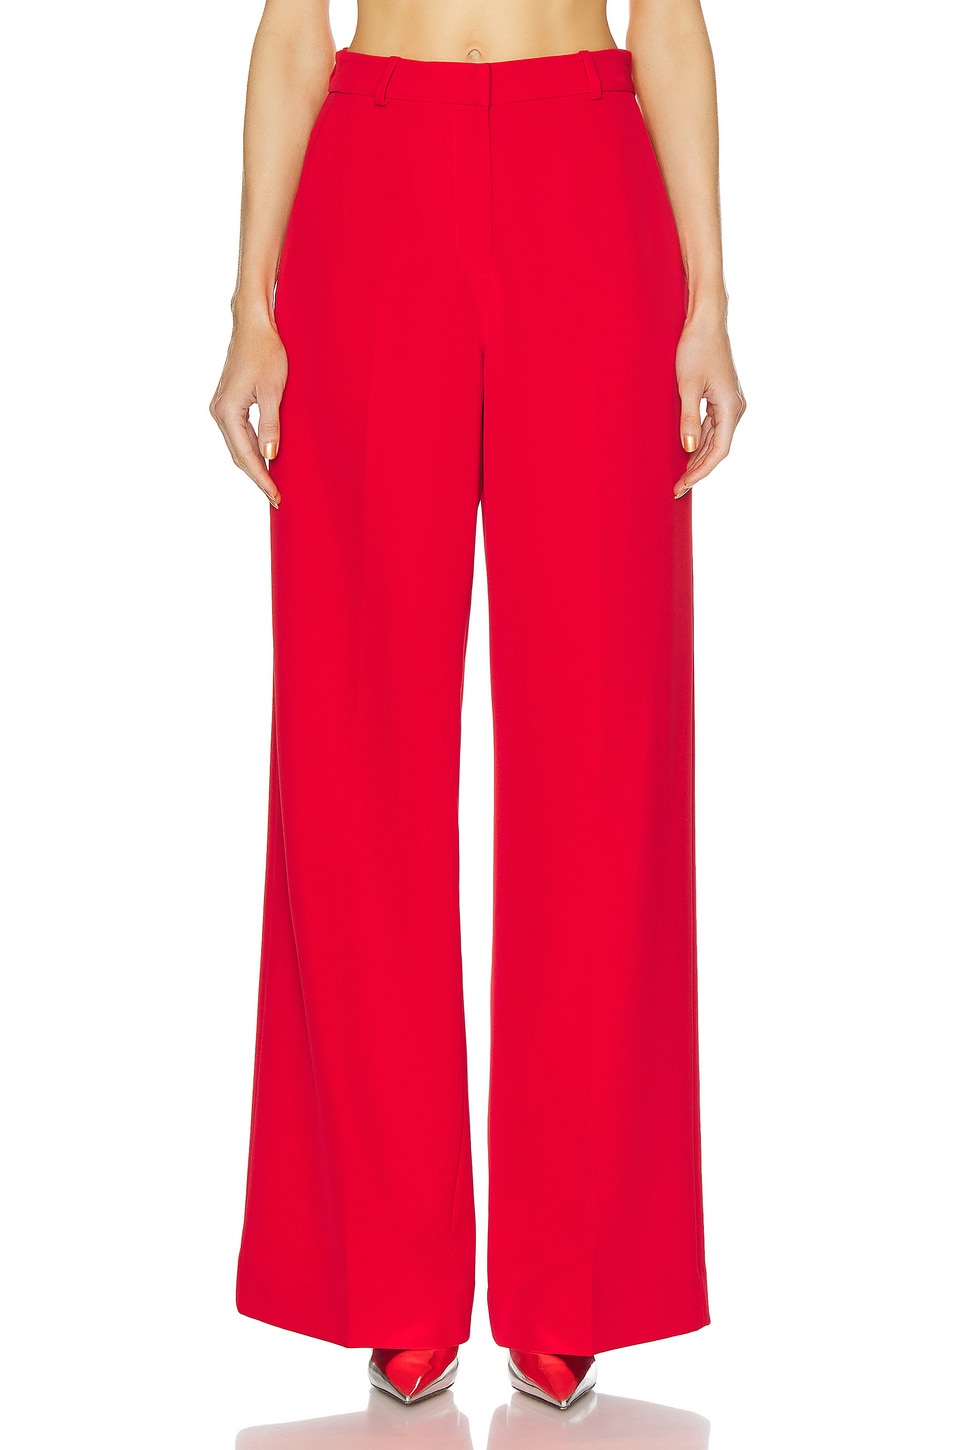 Image 1 of AKNVAS Elin Crepe Elastic Waistband Pant in Red